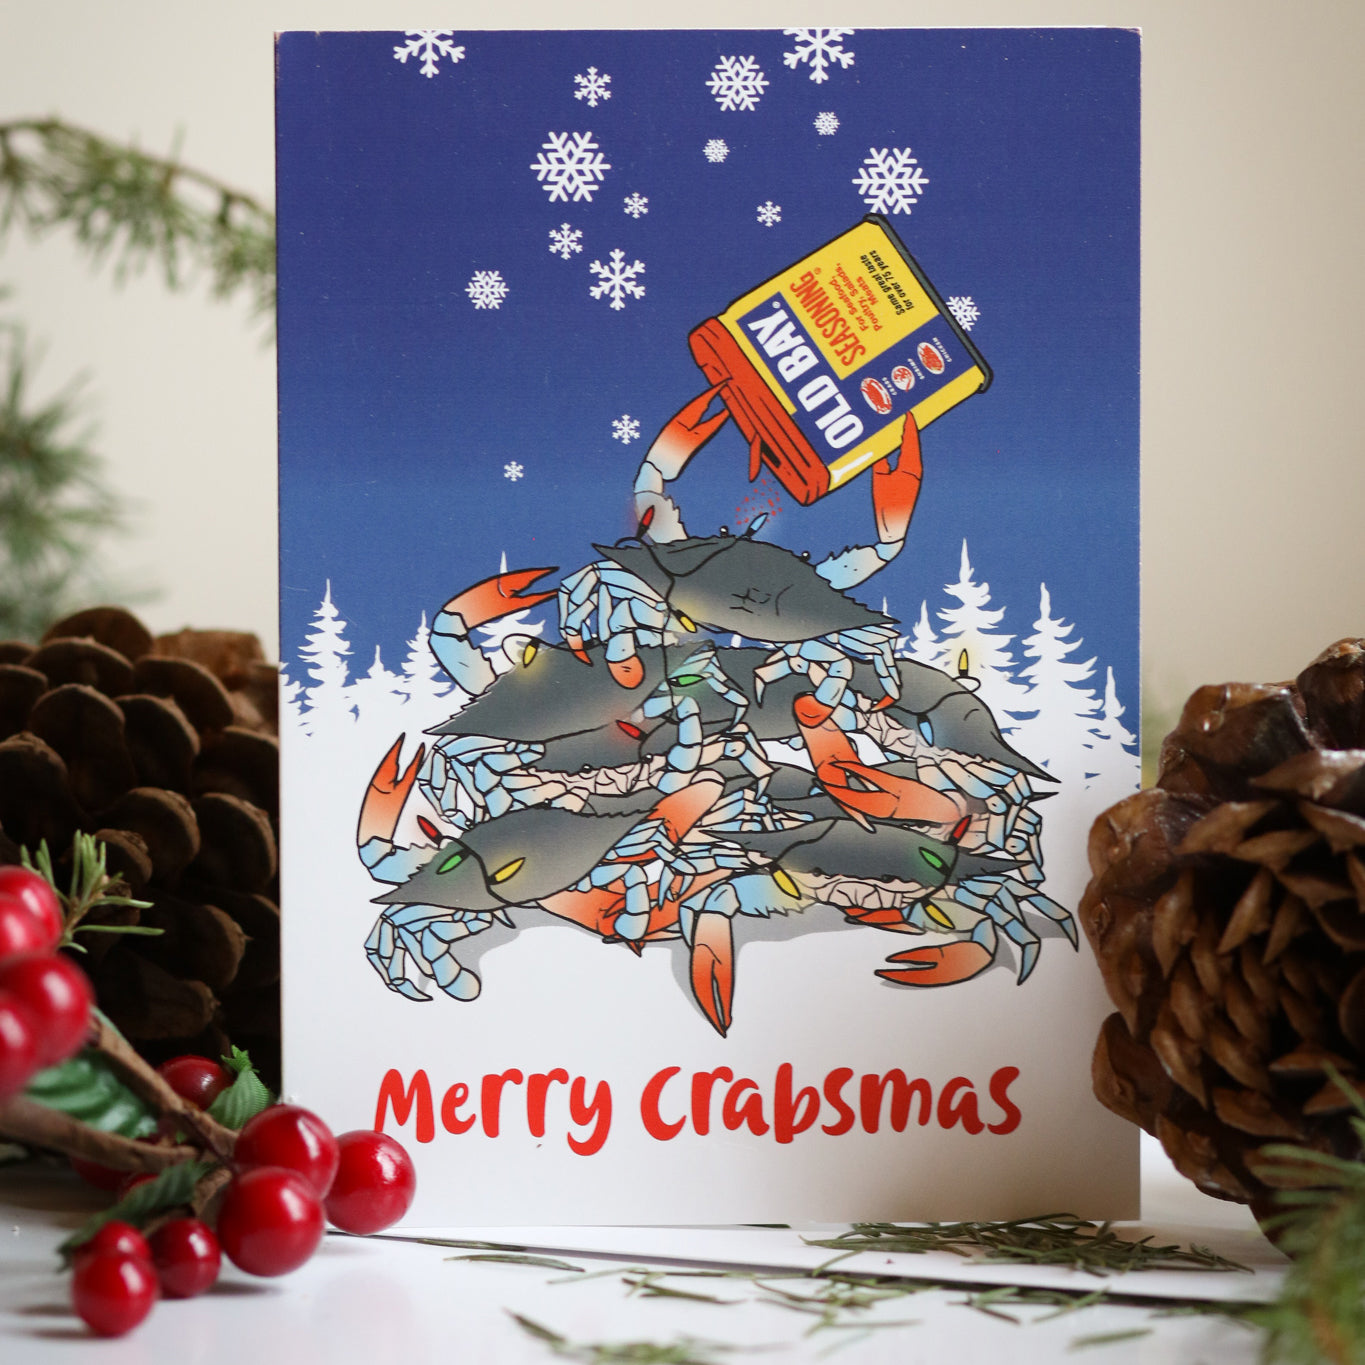 Merry Crabsmas - OLD BAY Christmas Tree Crabs / 8-Pack Christmas Cards - Route One Apparel